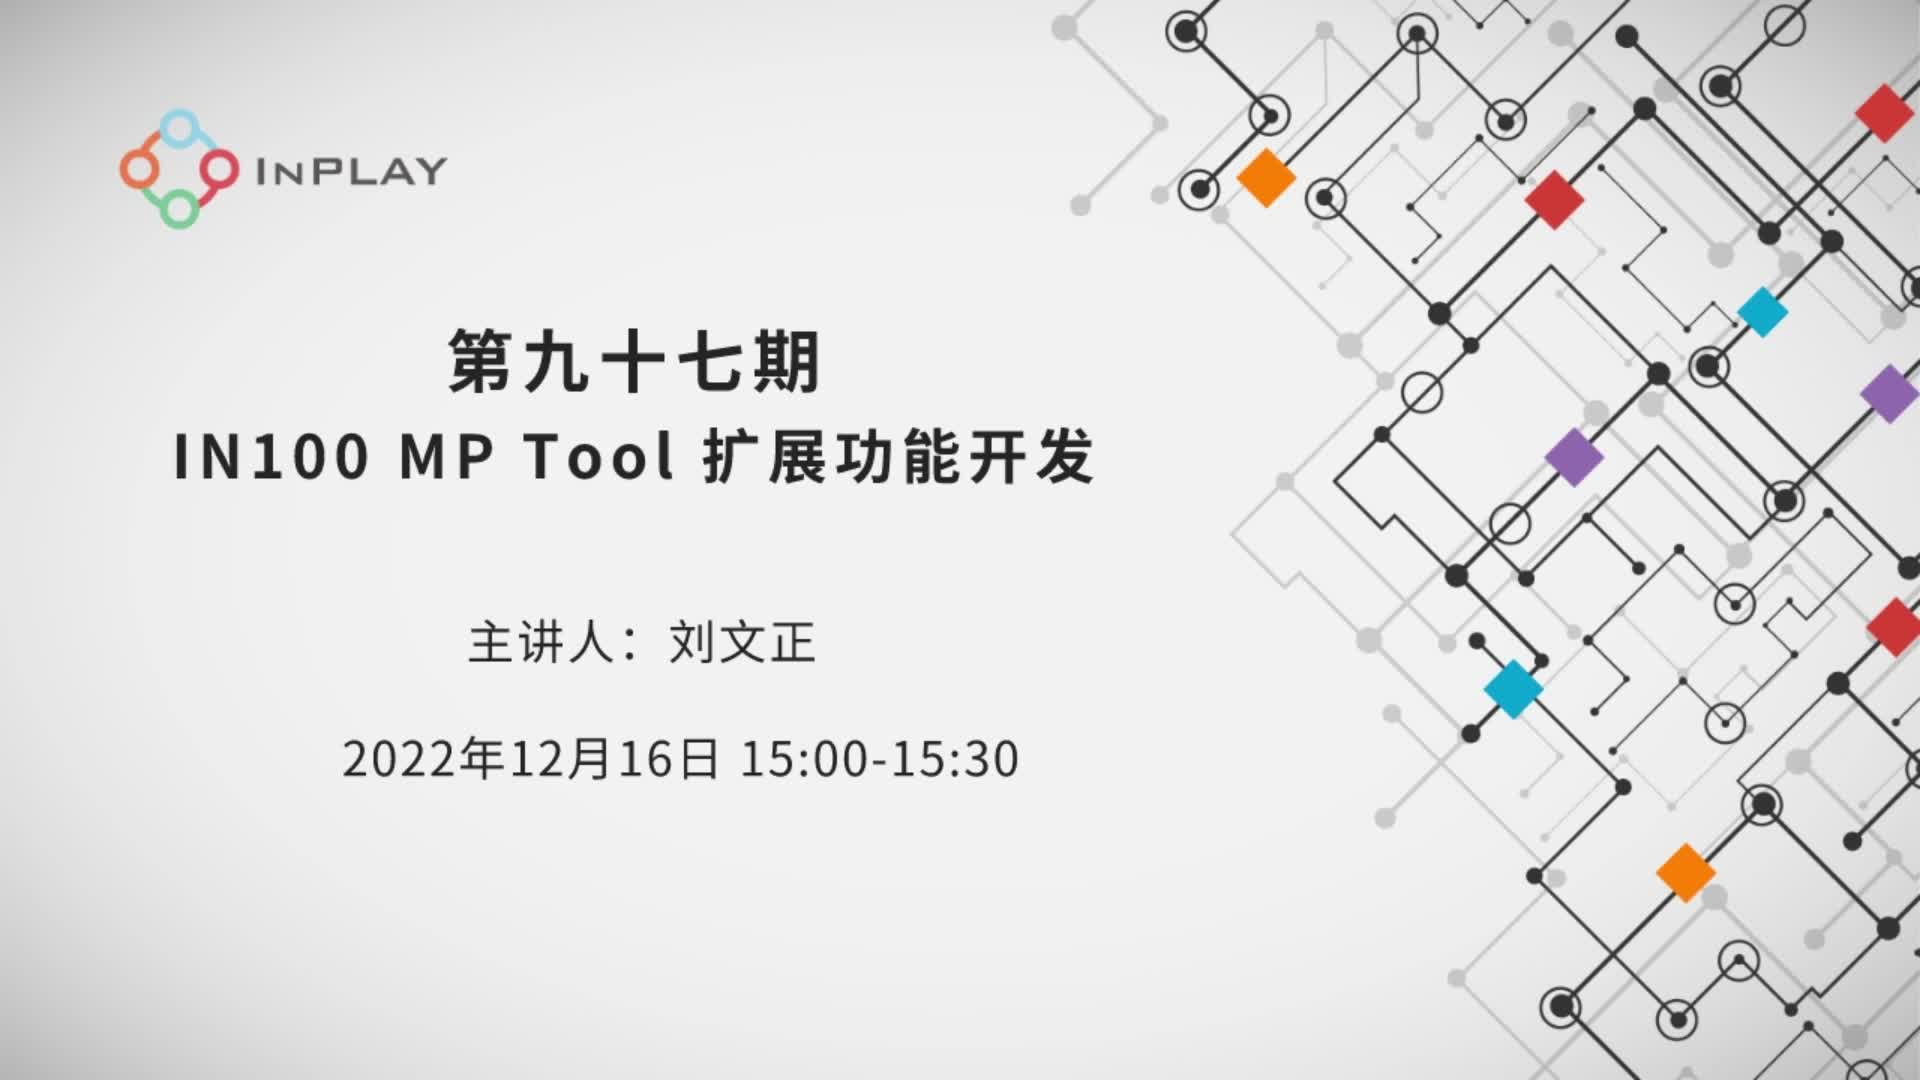 IN100 MP Tool 扩展功能开发